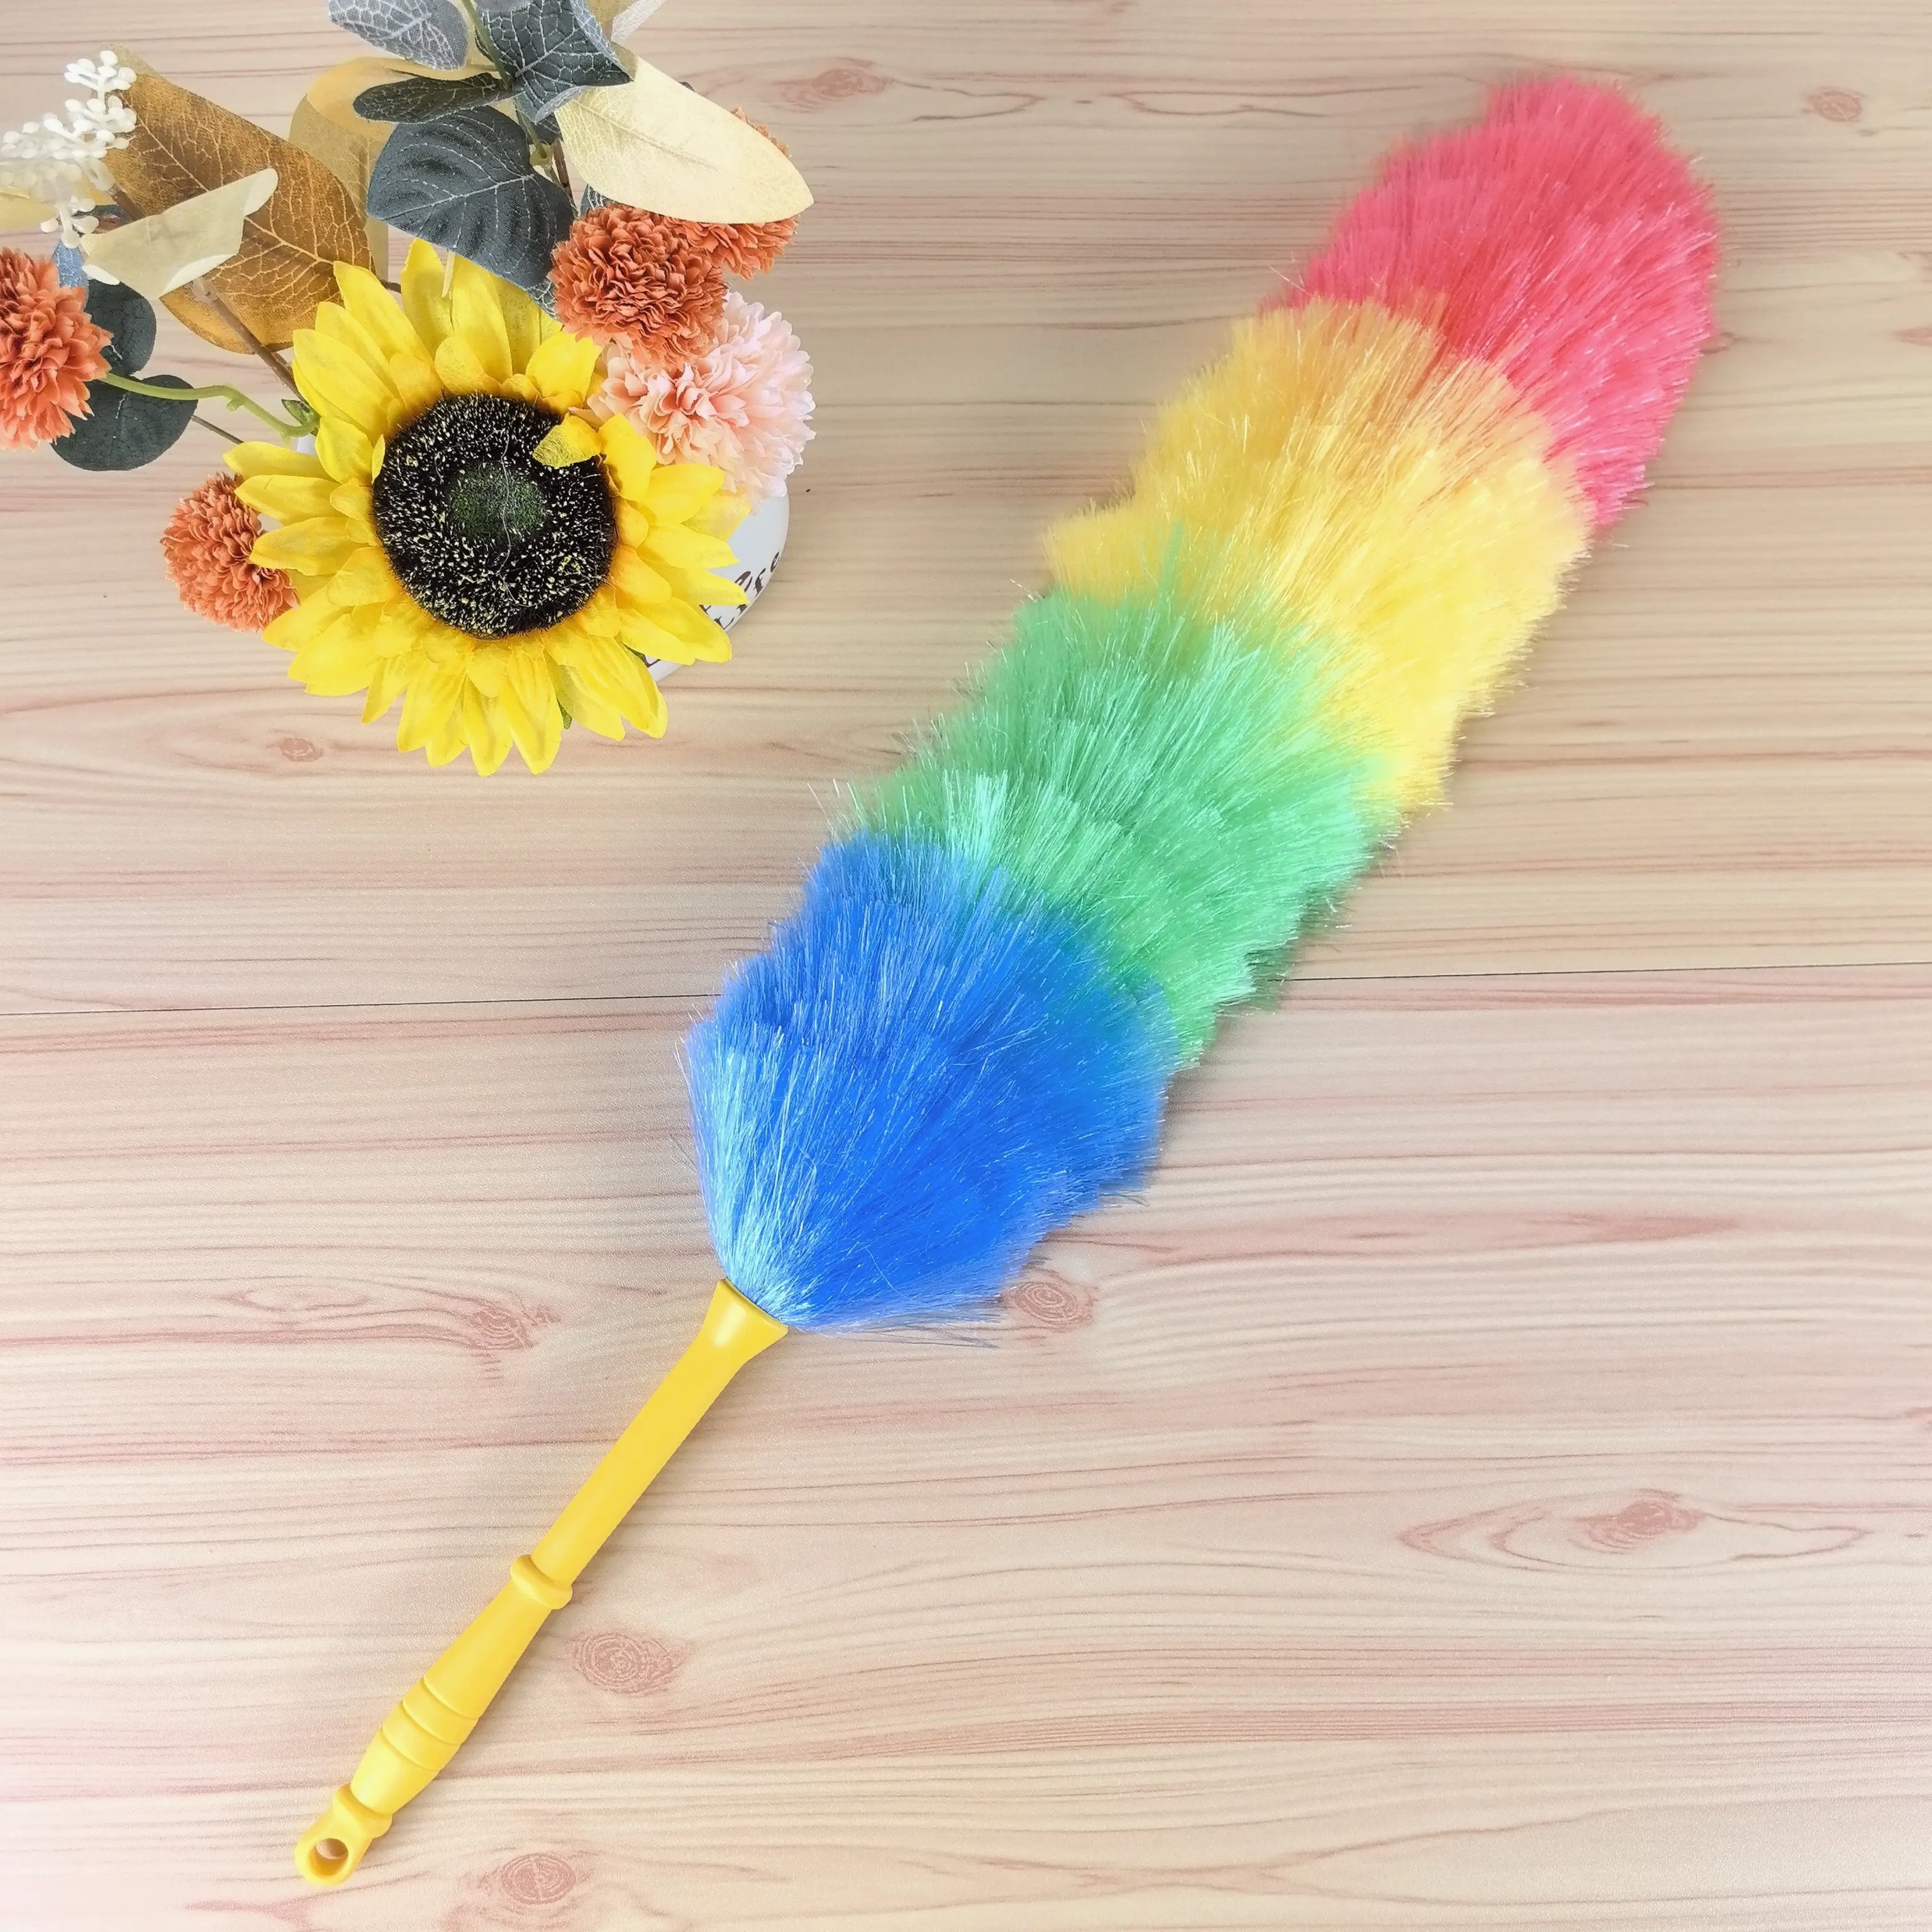 Household Microfiber 50g Feather Duster Flexible with Plastic Rubber Handle for Cleaning